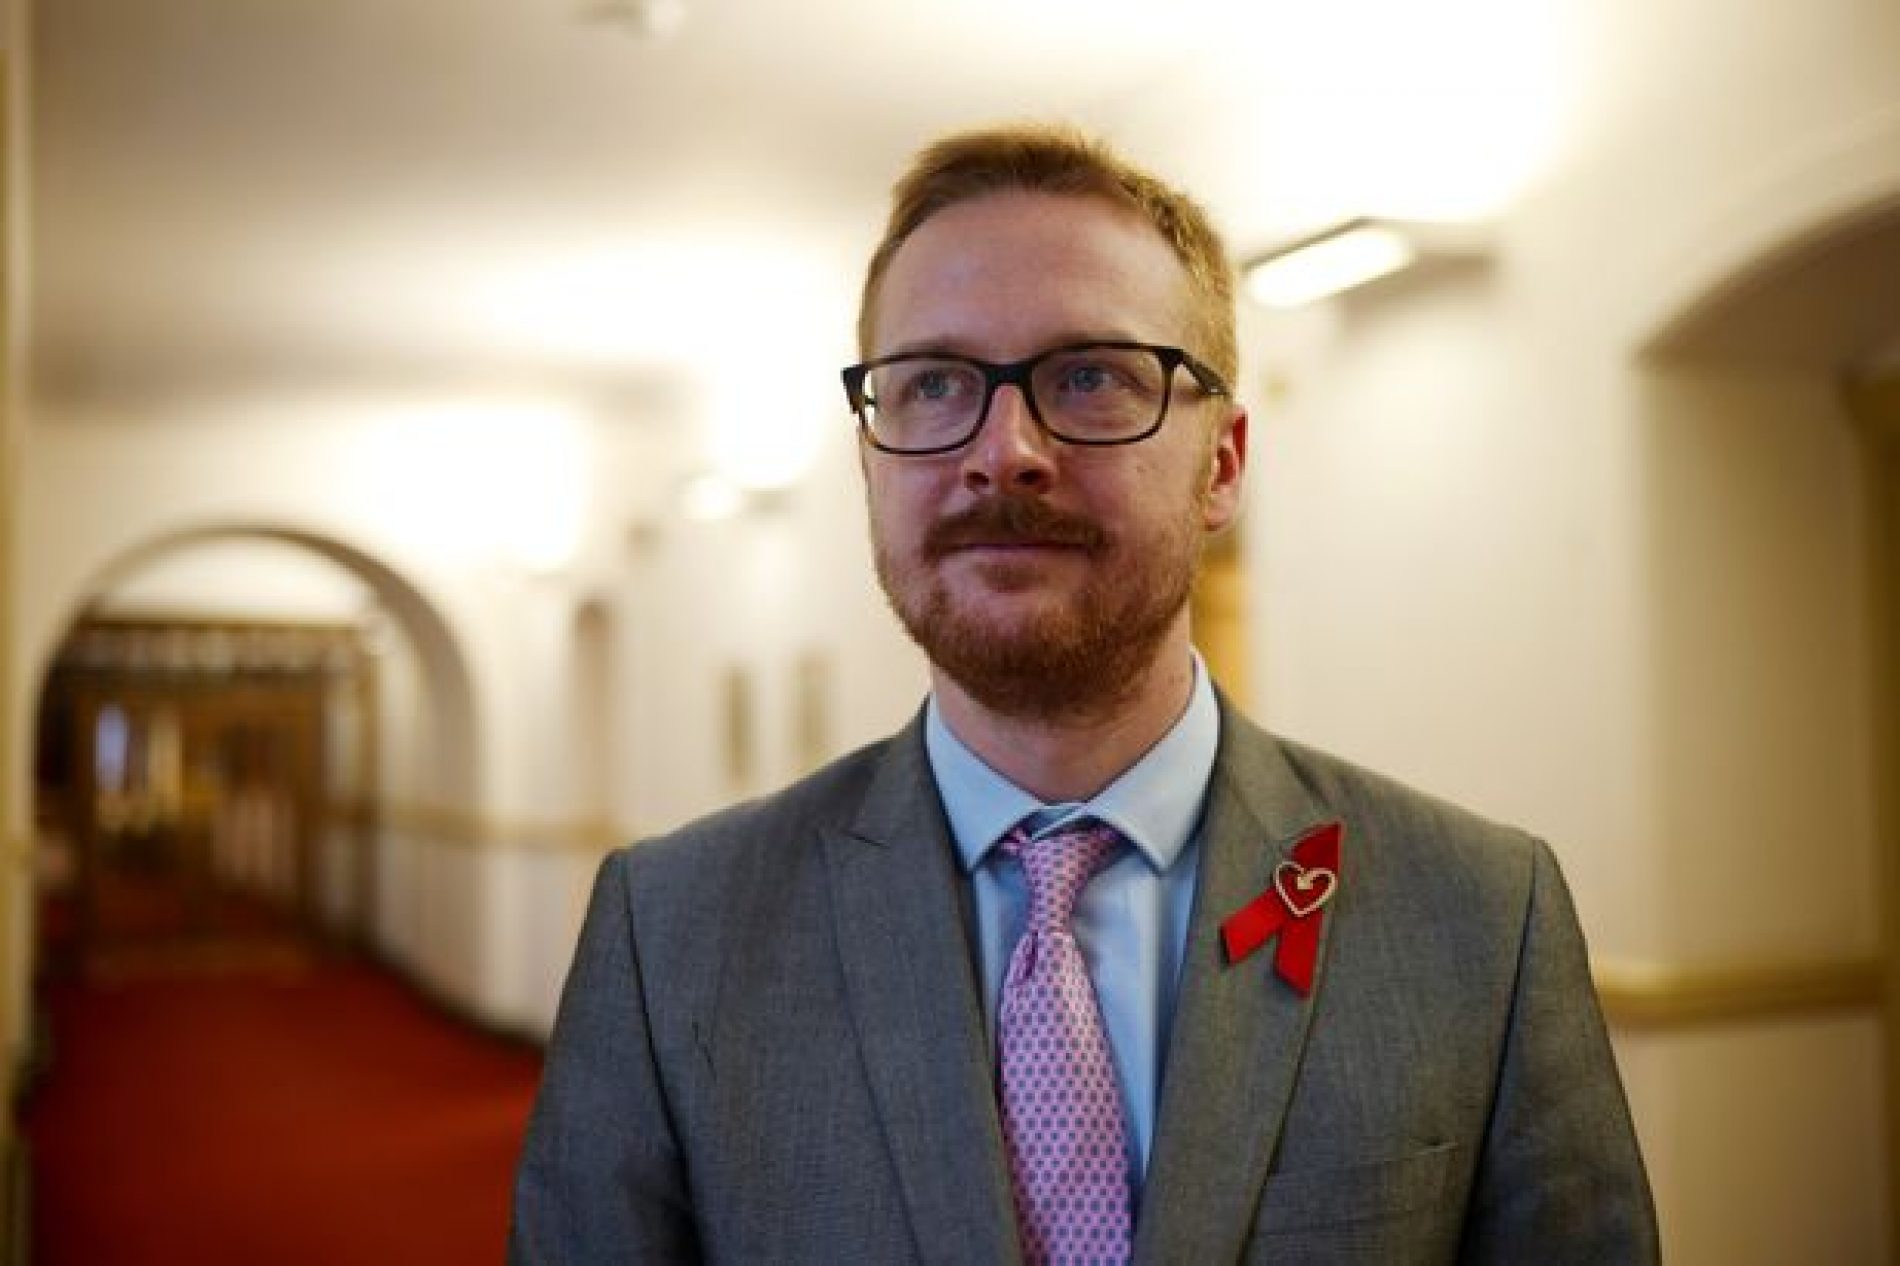 Politician comes out as HIV+ in a moving speech for World AIDS Day speech